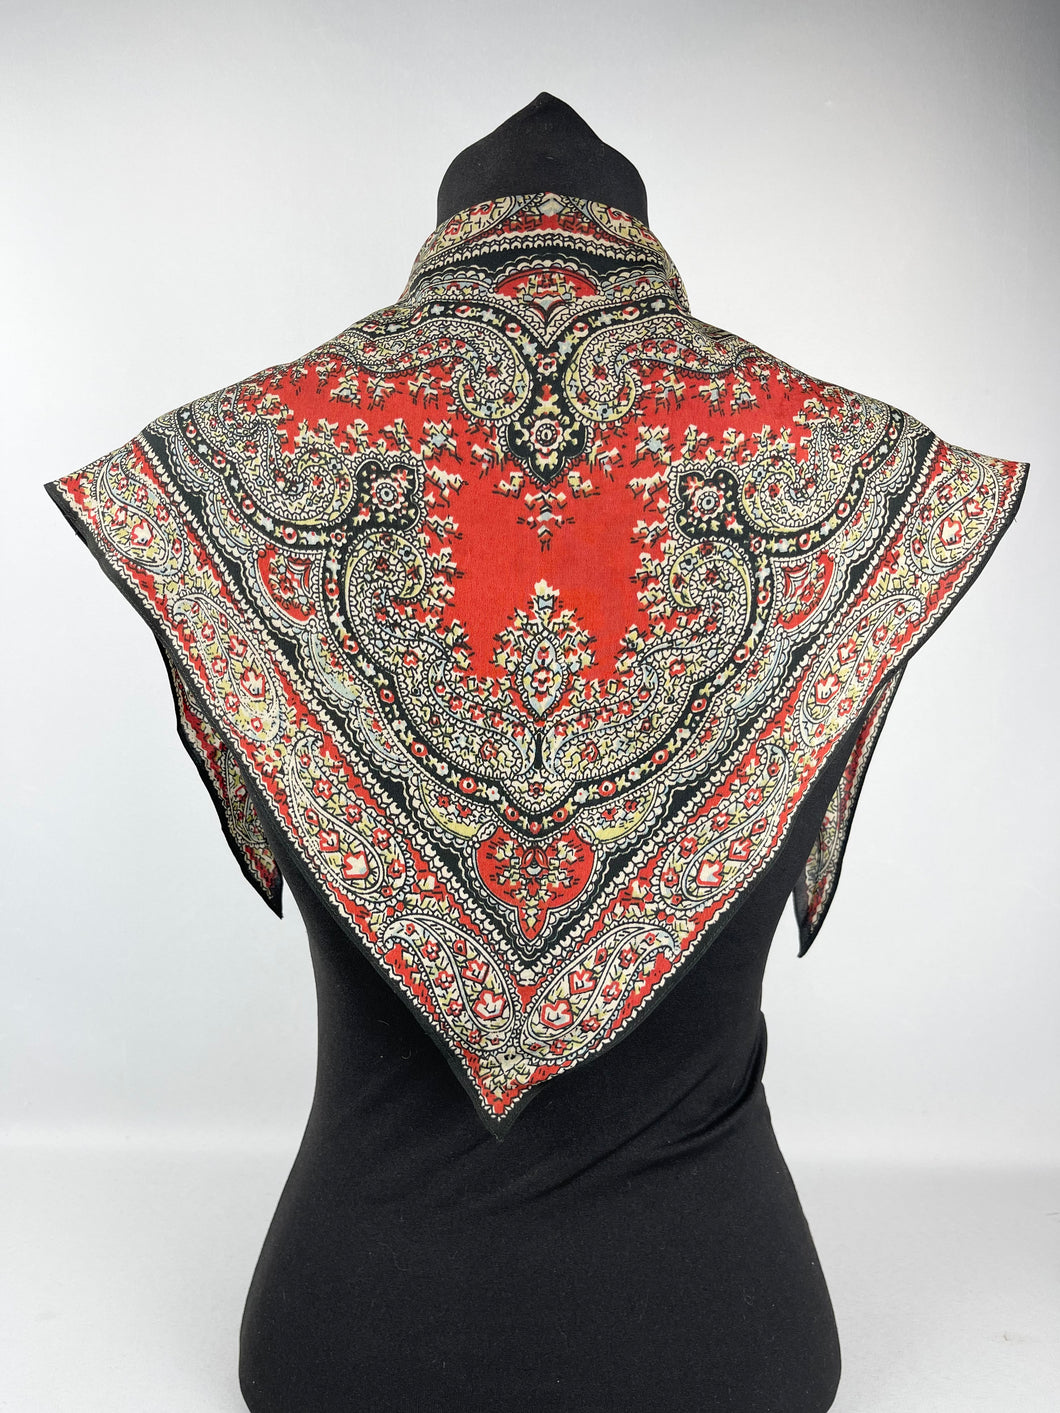 Original 1930's Triangular Crepe Scarf in Black and Red Paisley Print - Vintage Neckerchief